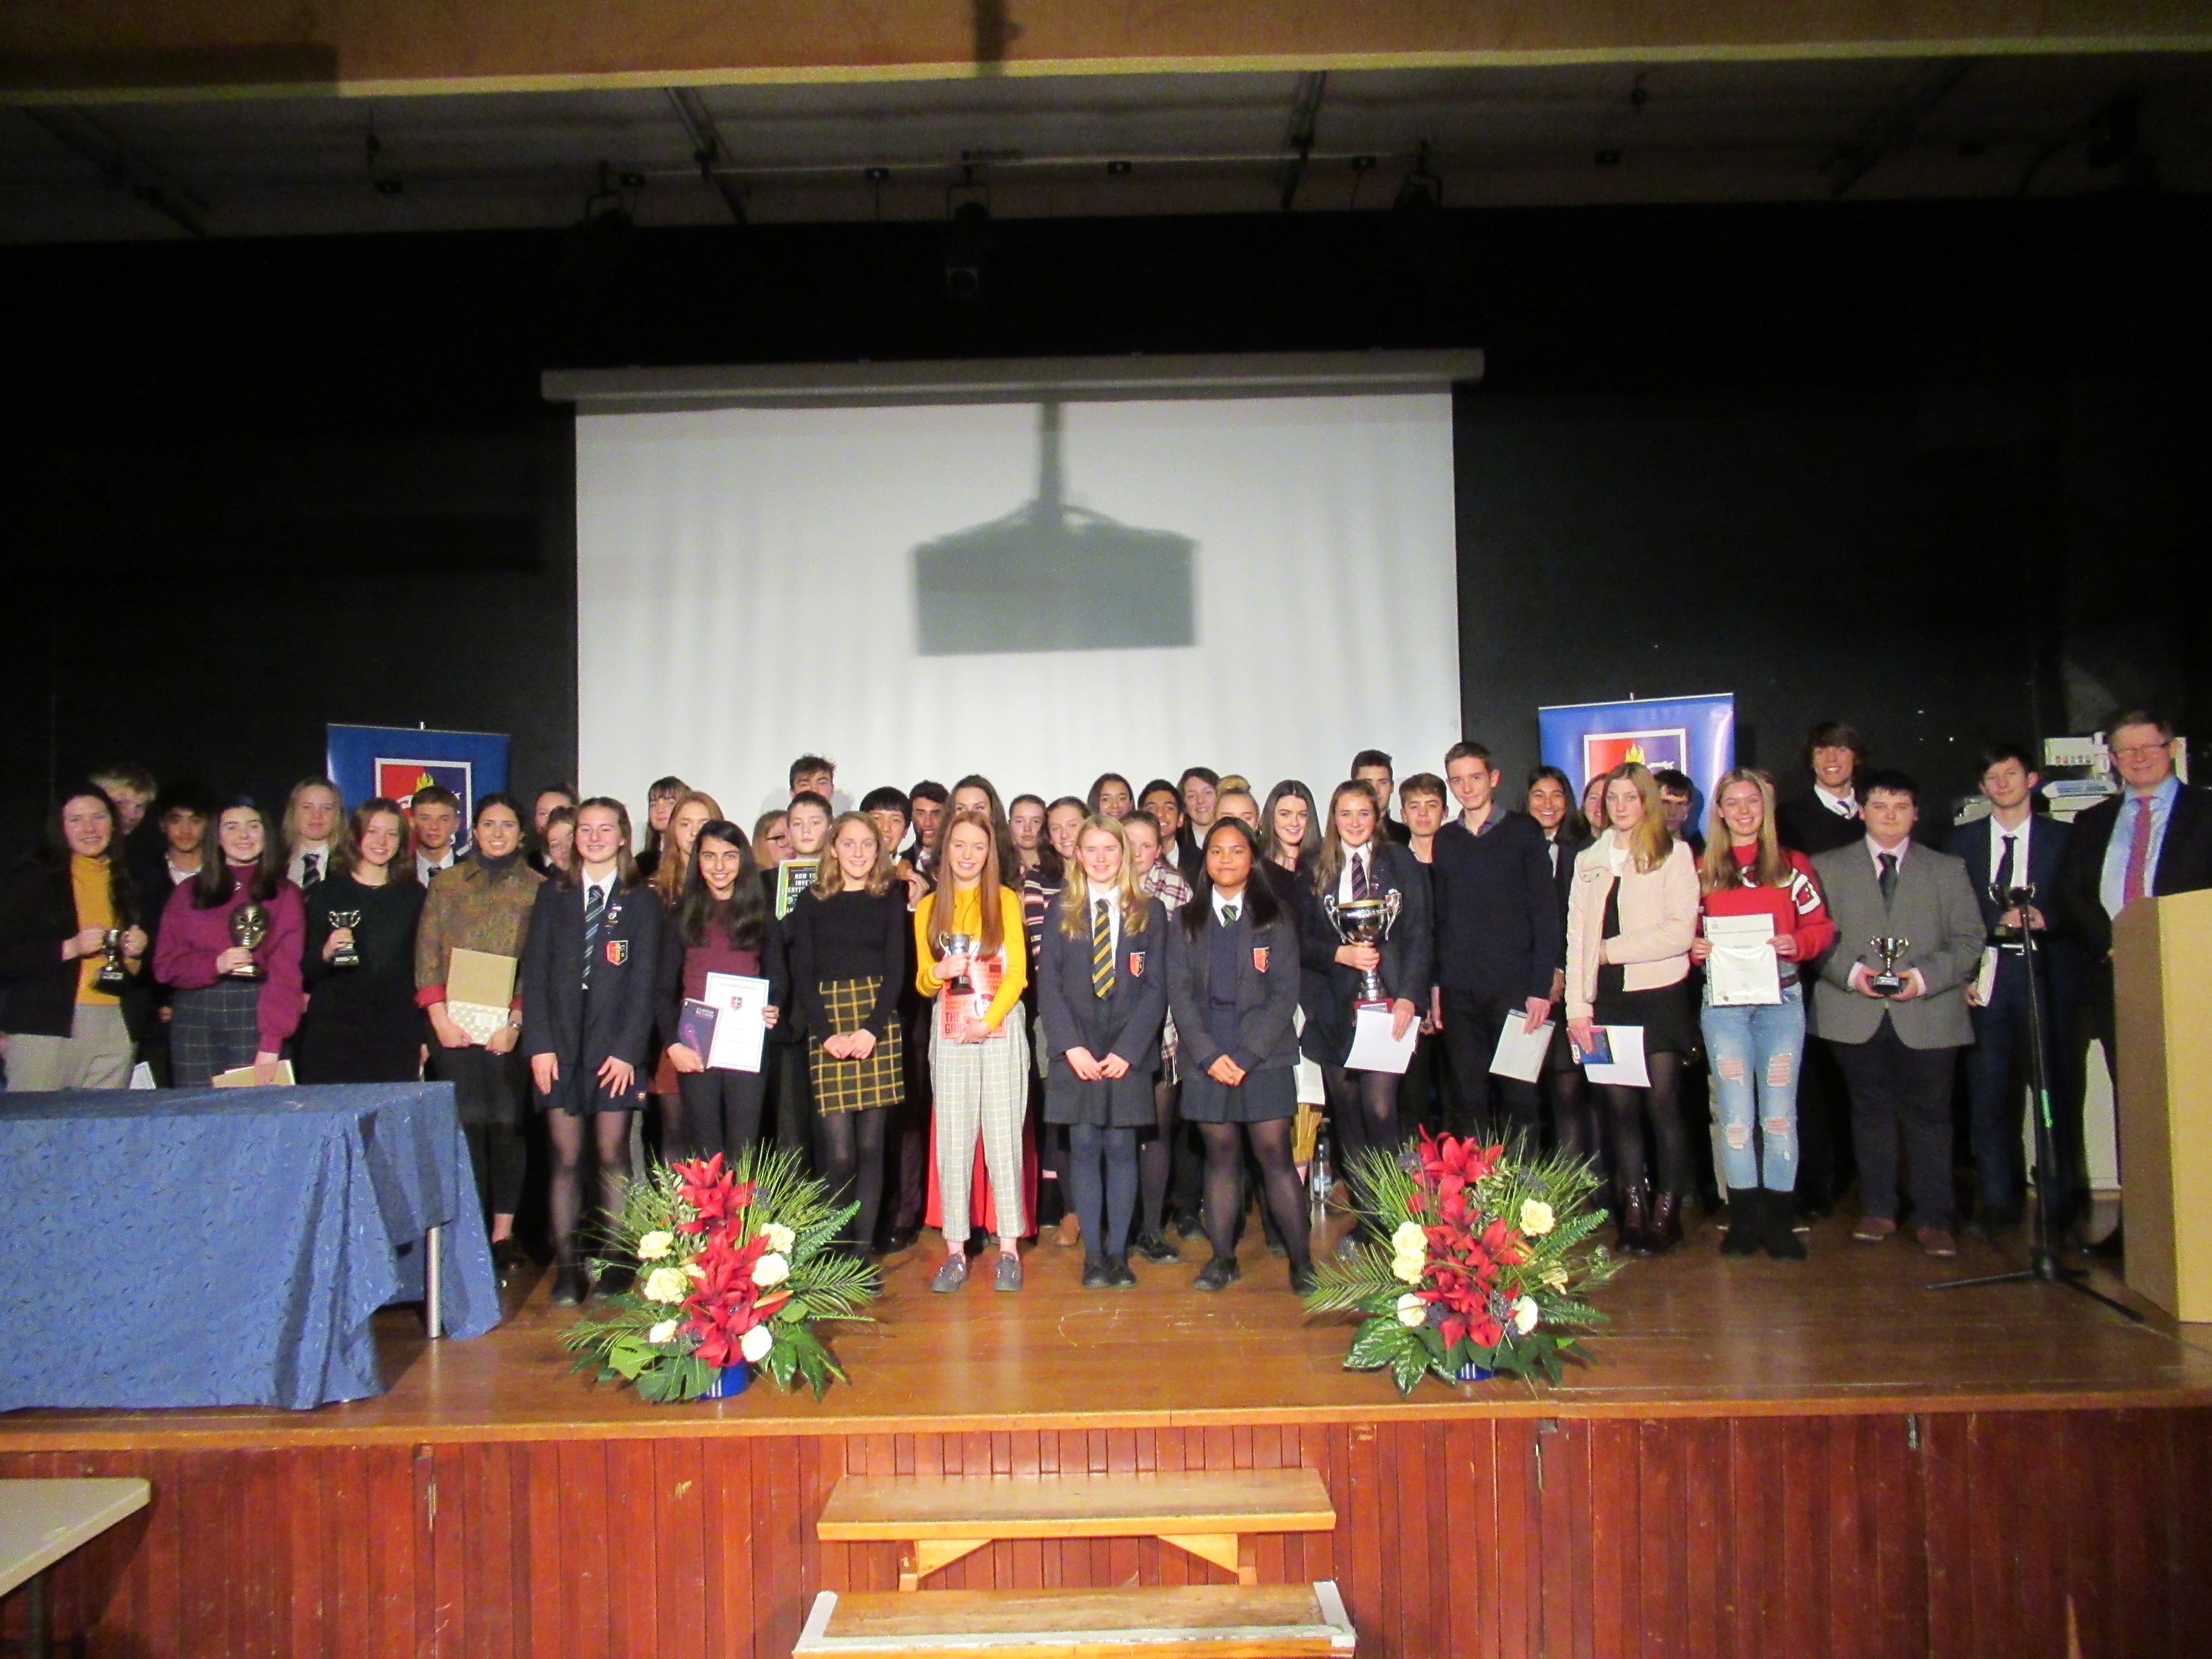 Ks3 and ks4 students with their awards